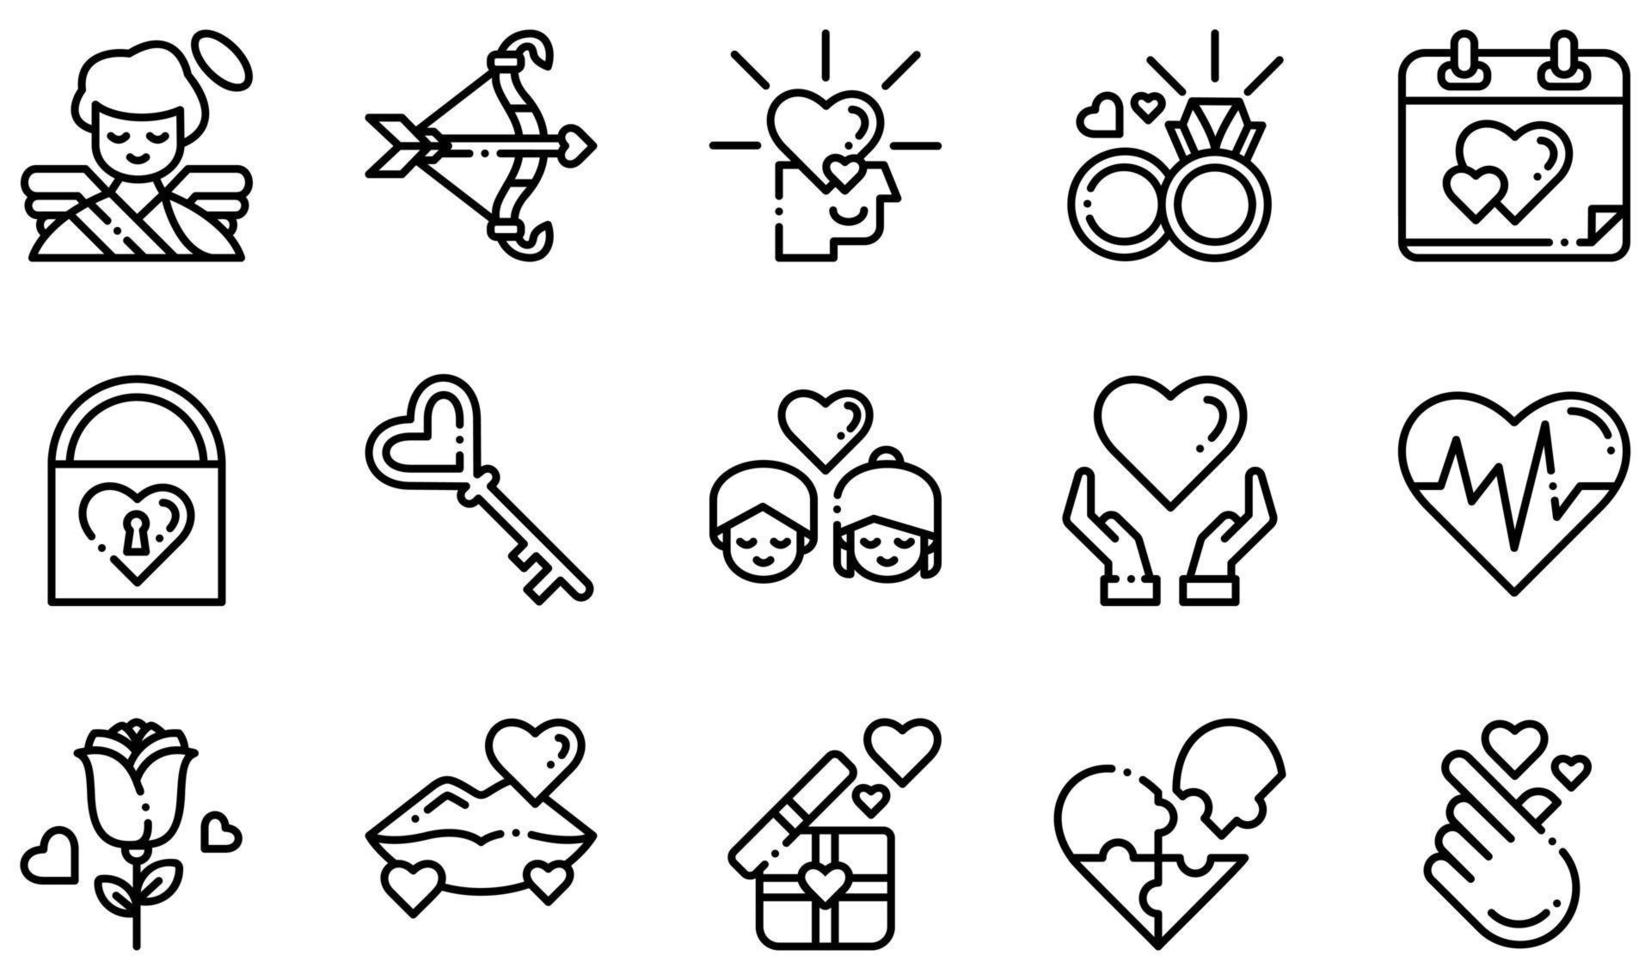 Set of Vector Icons Related to Love. Contains such Icons as Cupid, In Love, Wedding Ring, Padlock, Love, Rose and more.